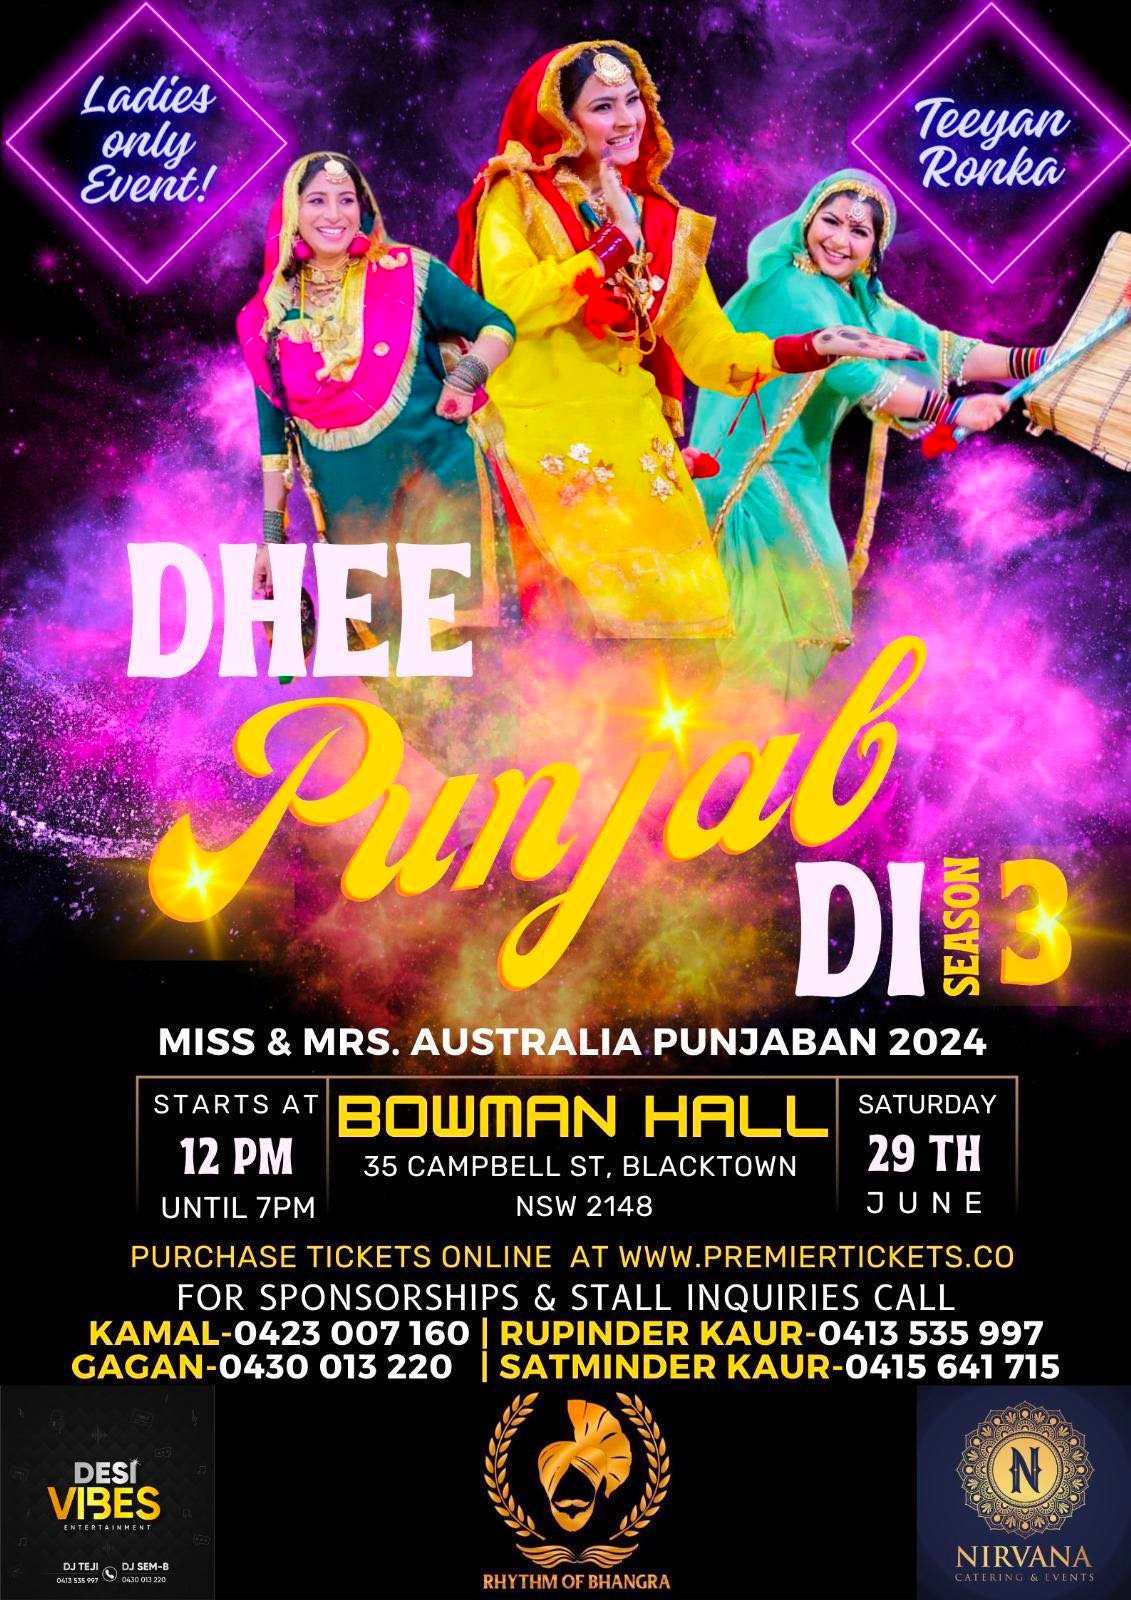 A Vibrant Celebration of Dhee Punjab Di In Australia On 29th June 2024